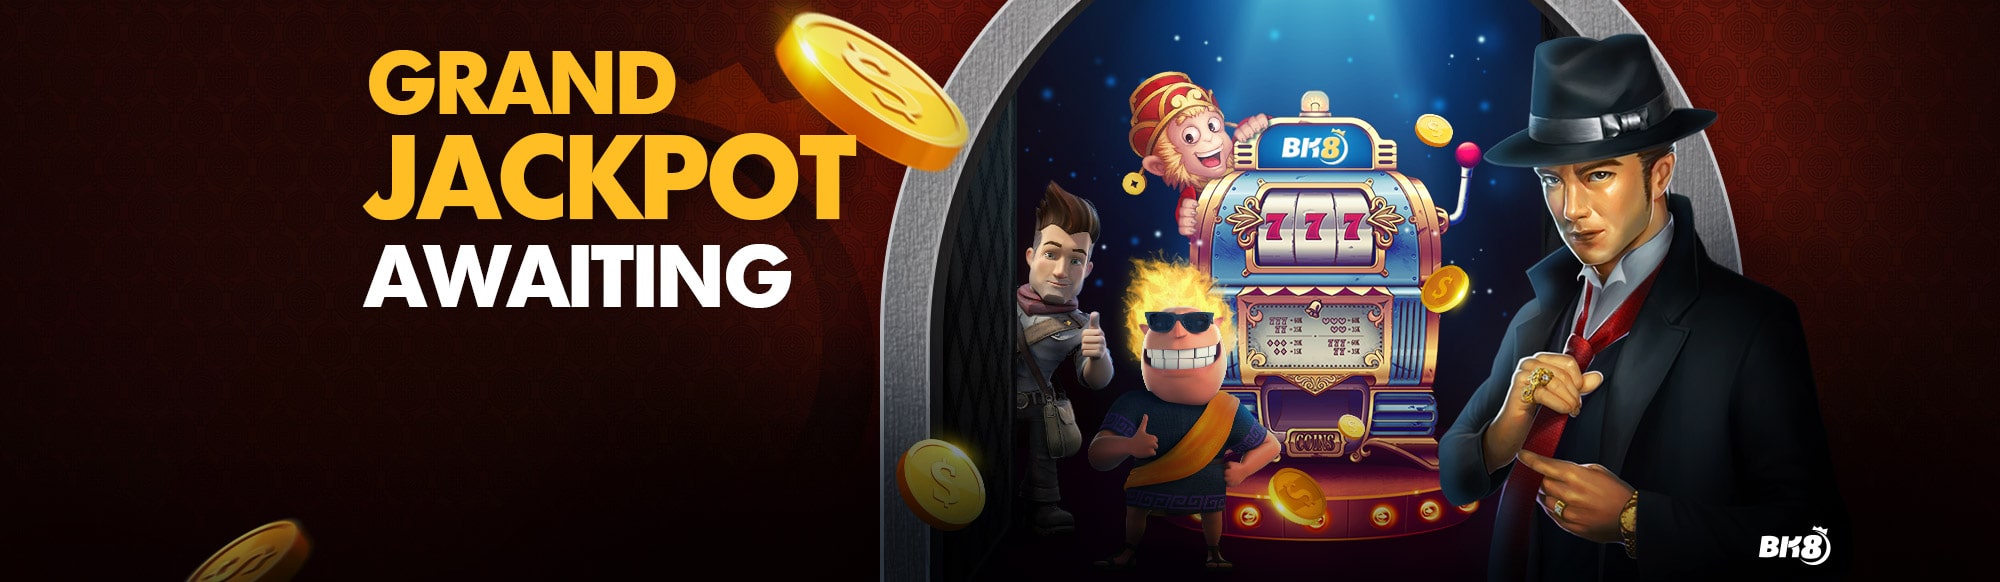 online slot game malaysia